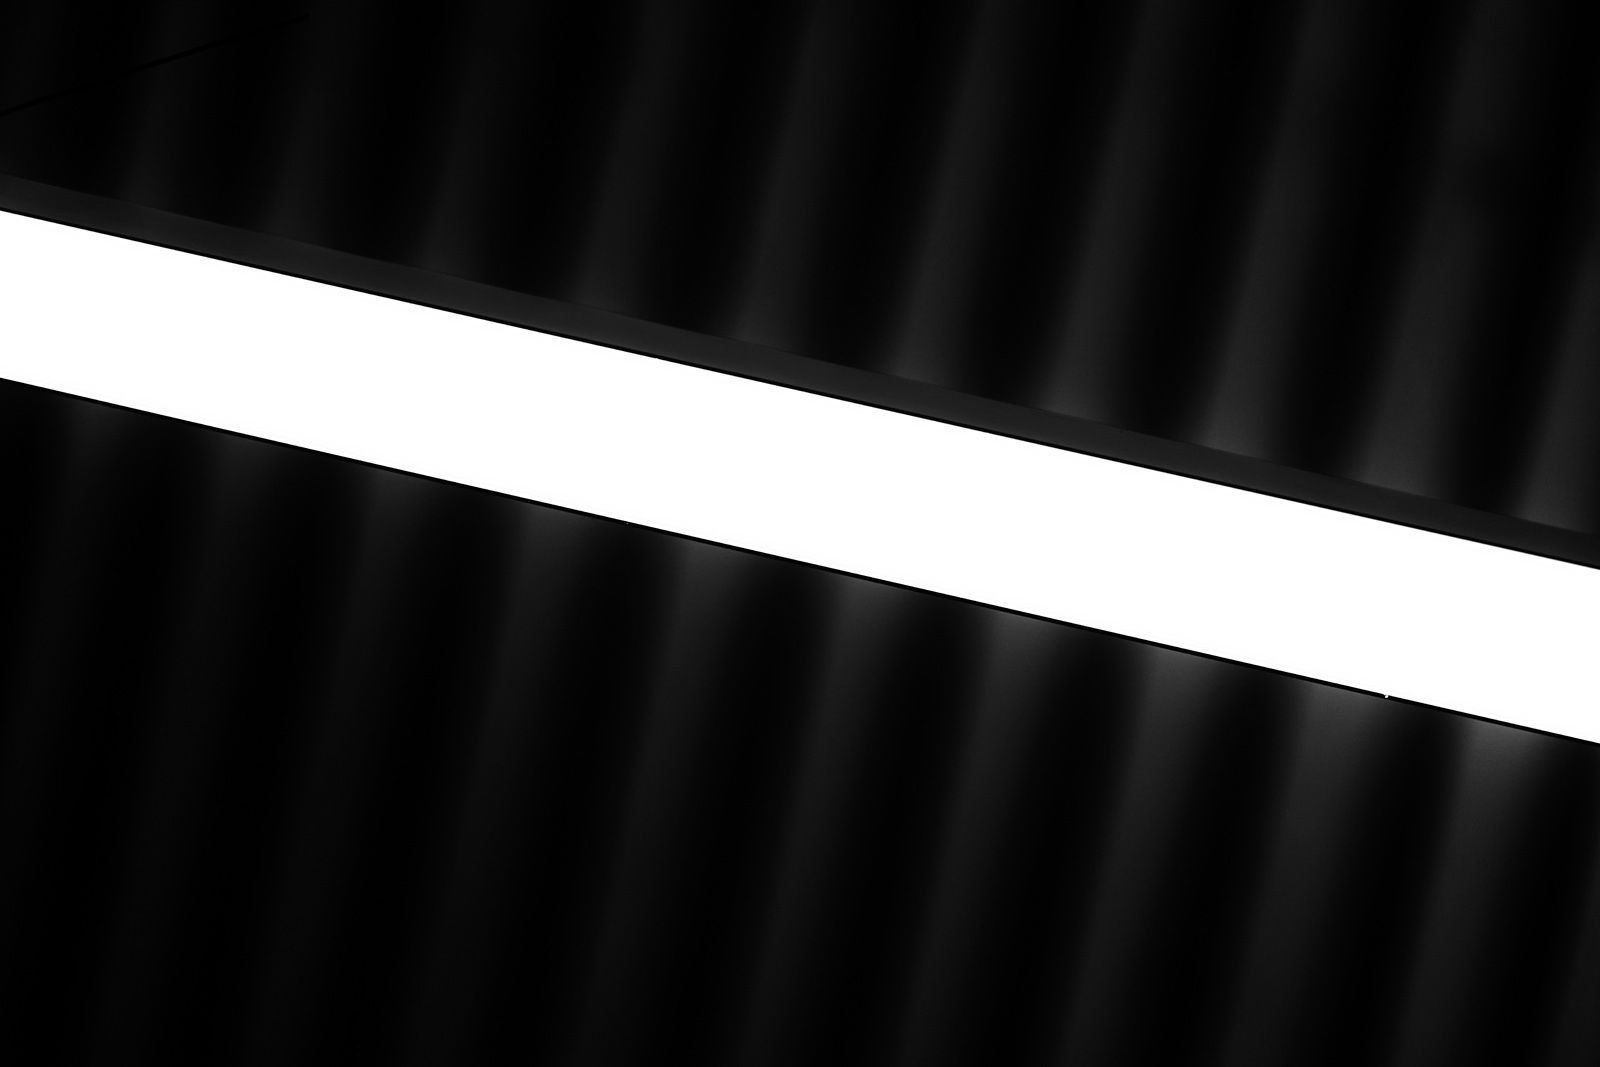 Abstraction of a corrugated metal ceiling and a LED tube light.